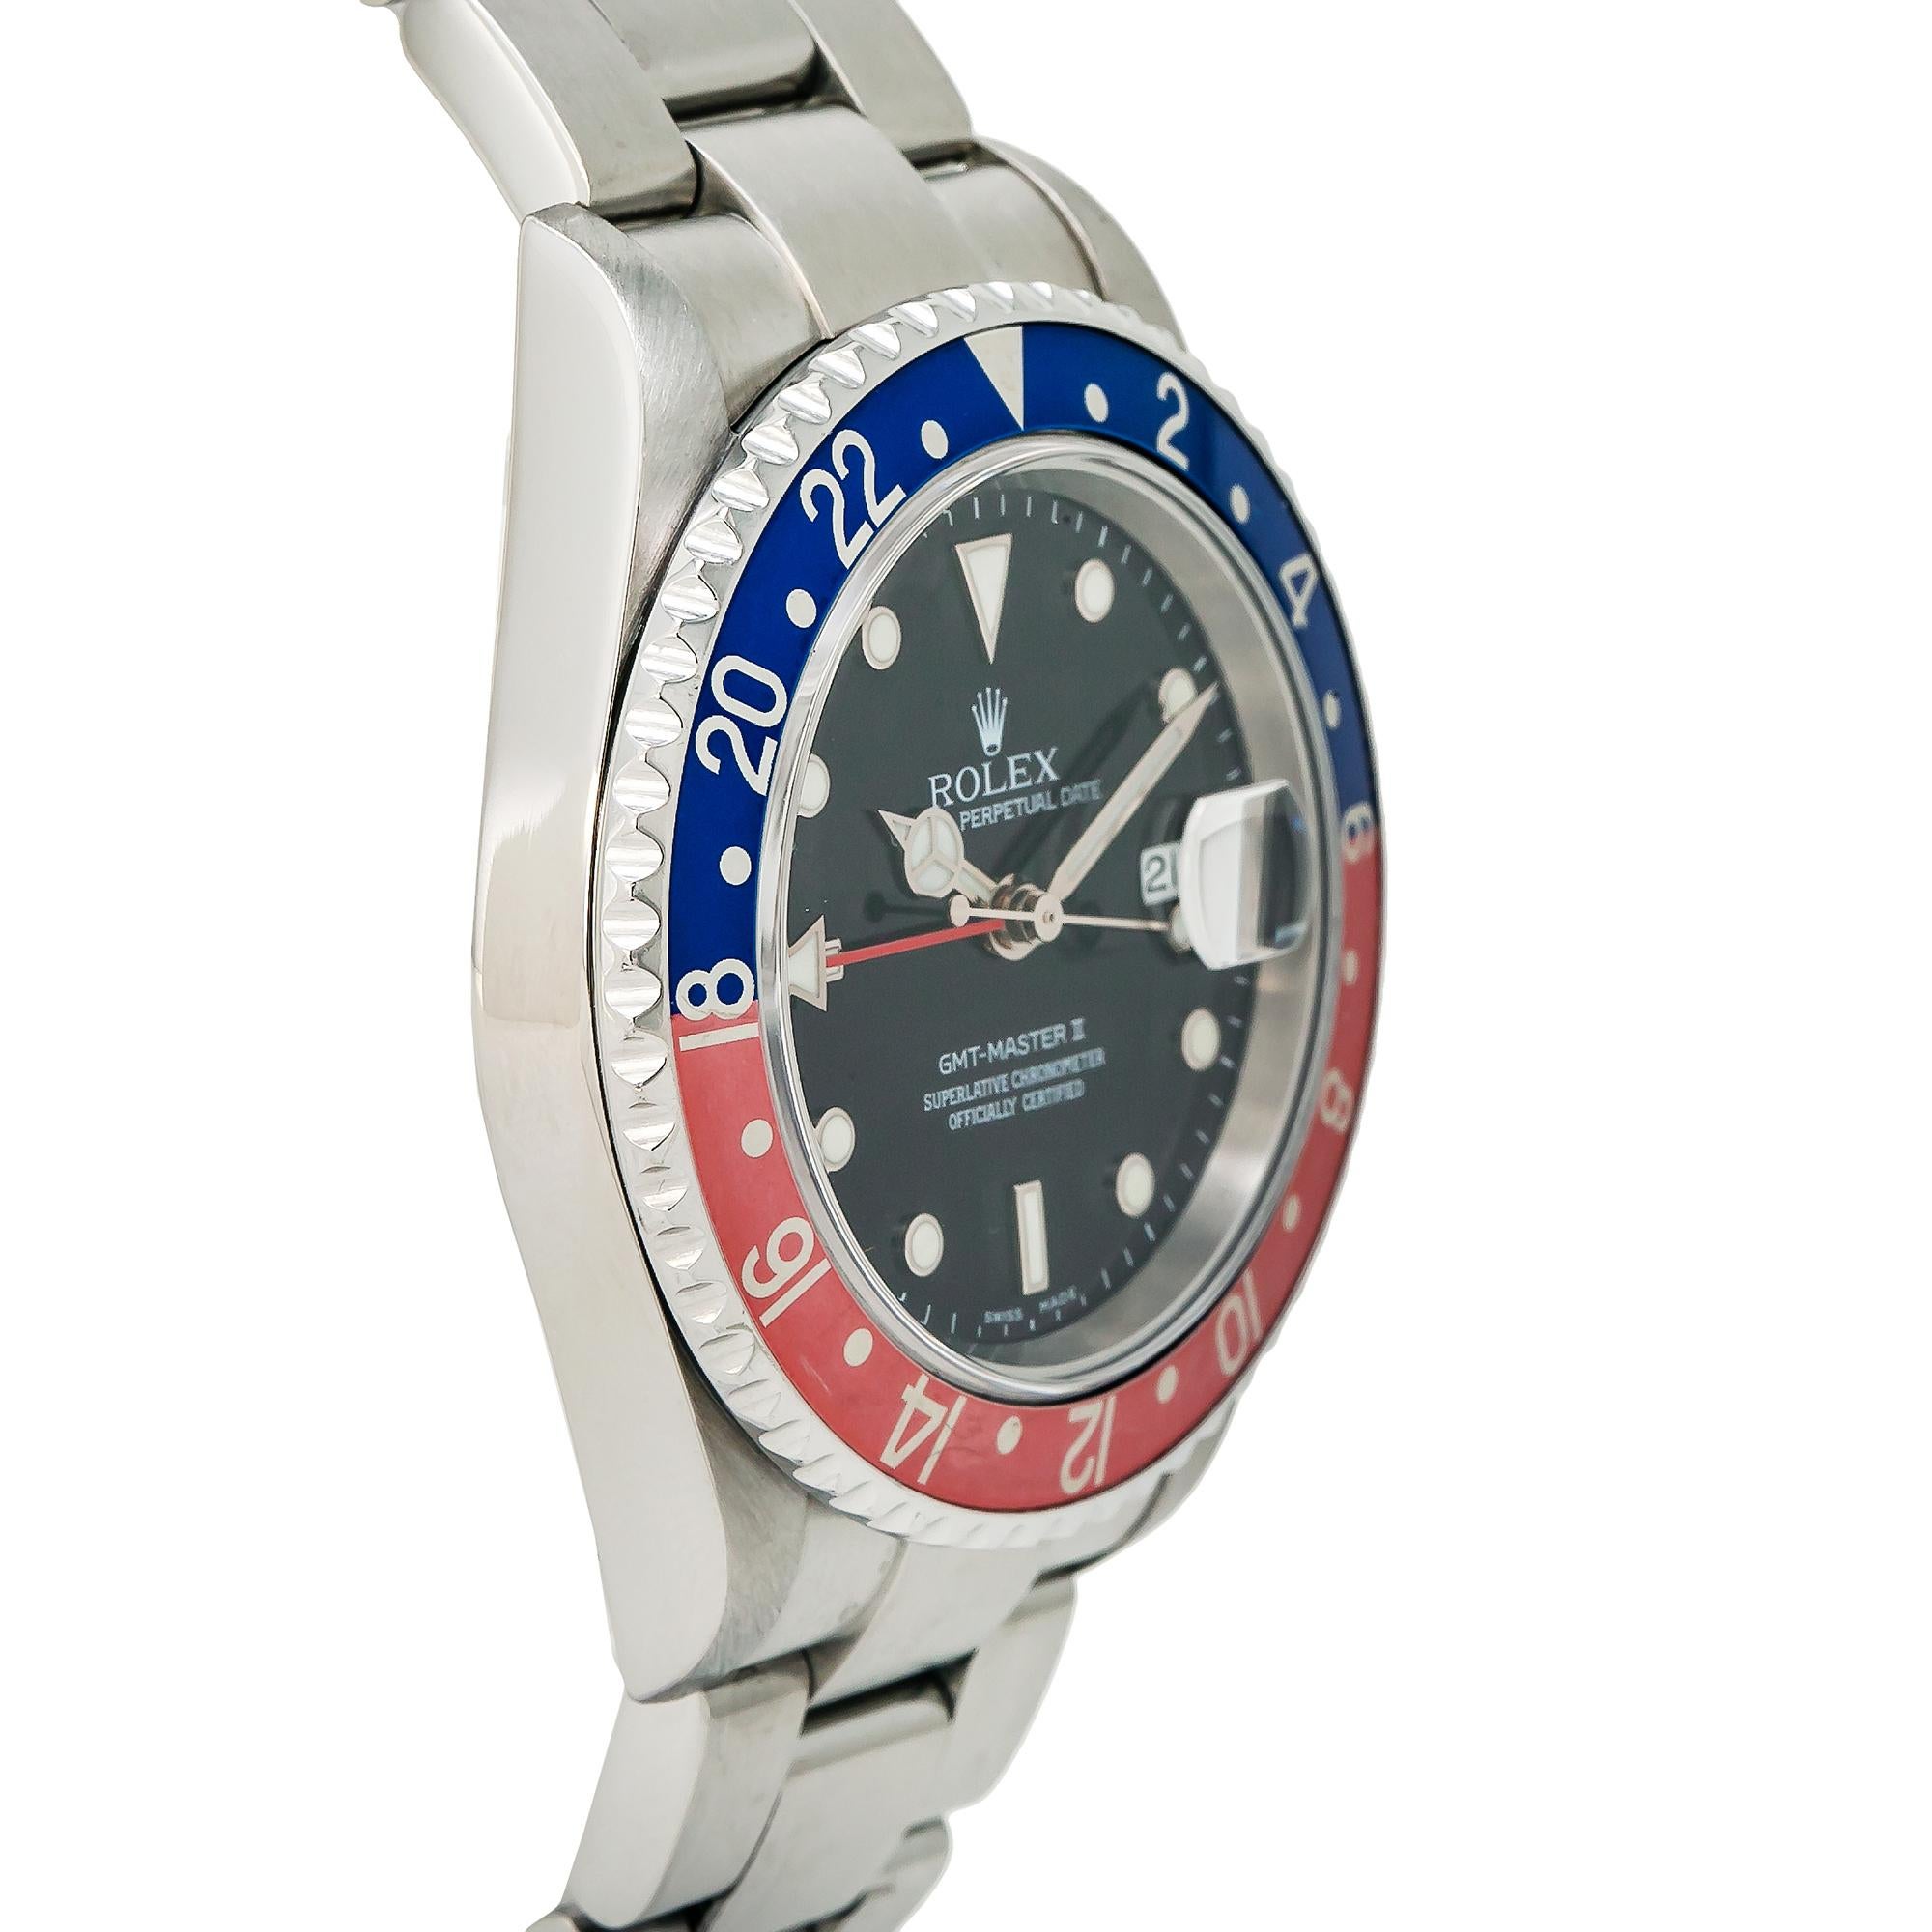 Rolex GMT-Master II 16710T Men's Automatic Watch Stainless Steel Black Dial In Good Condition For Sale In Miami, FL